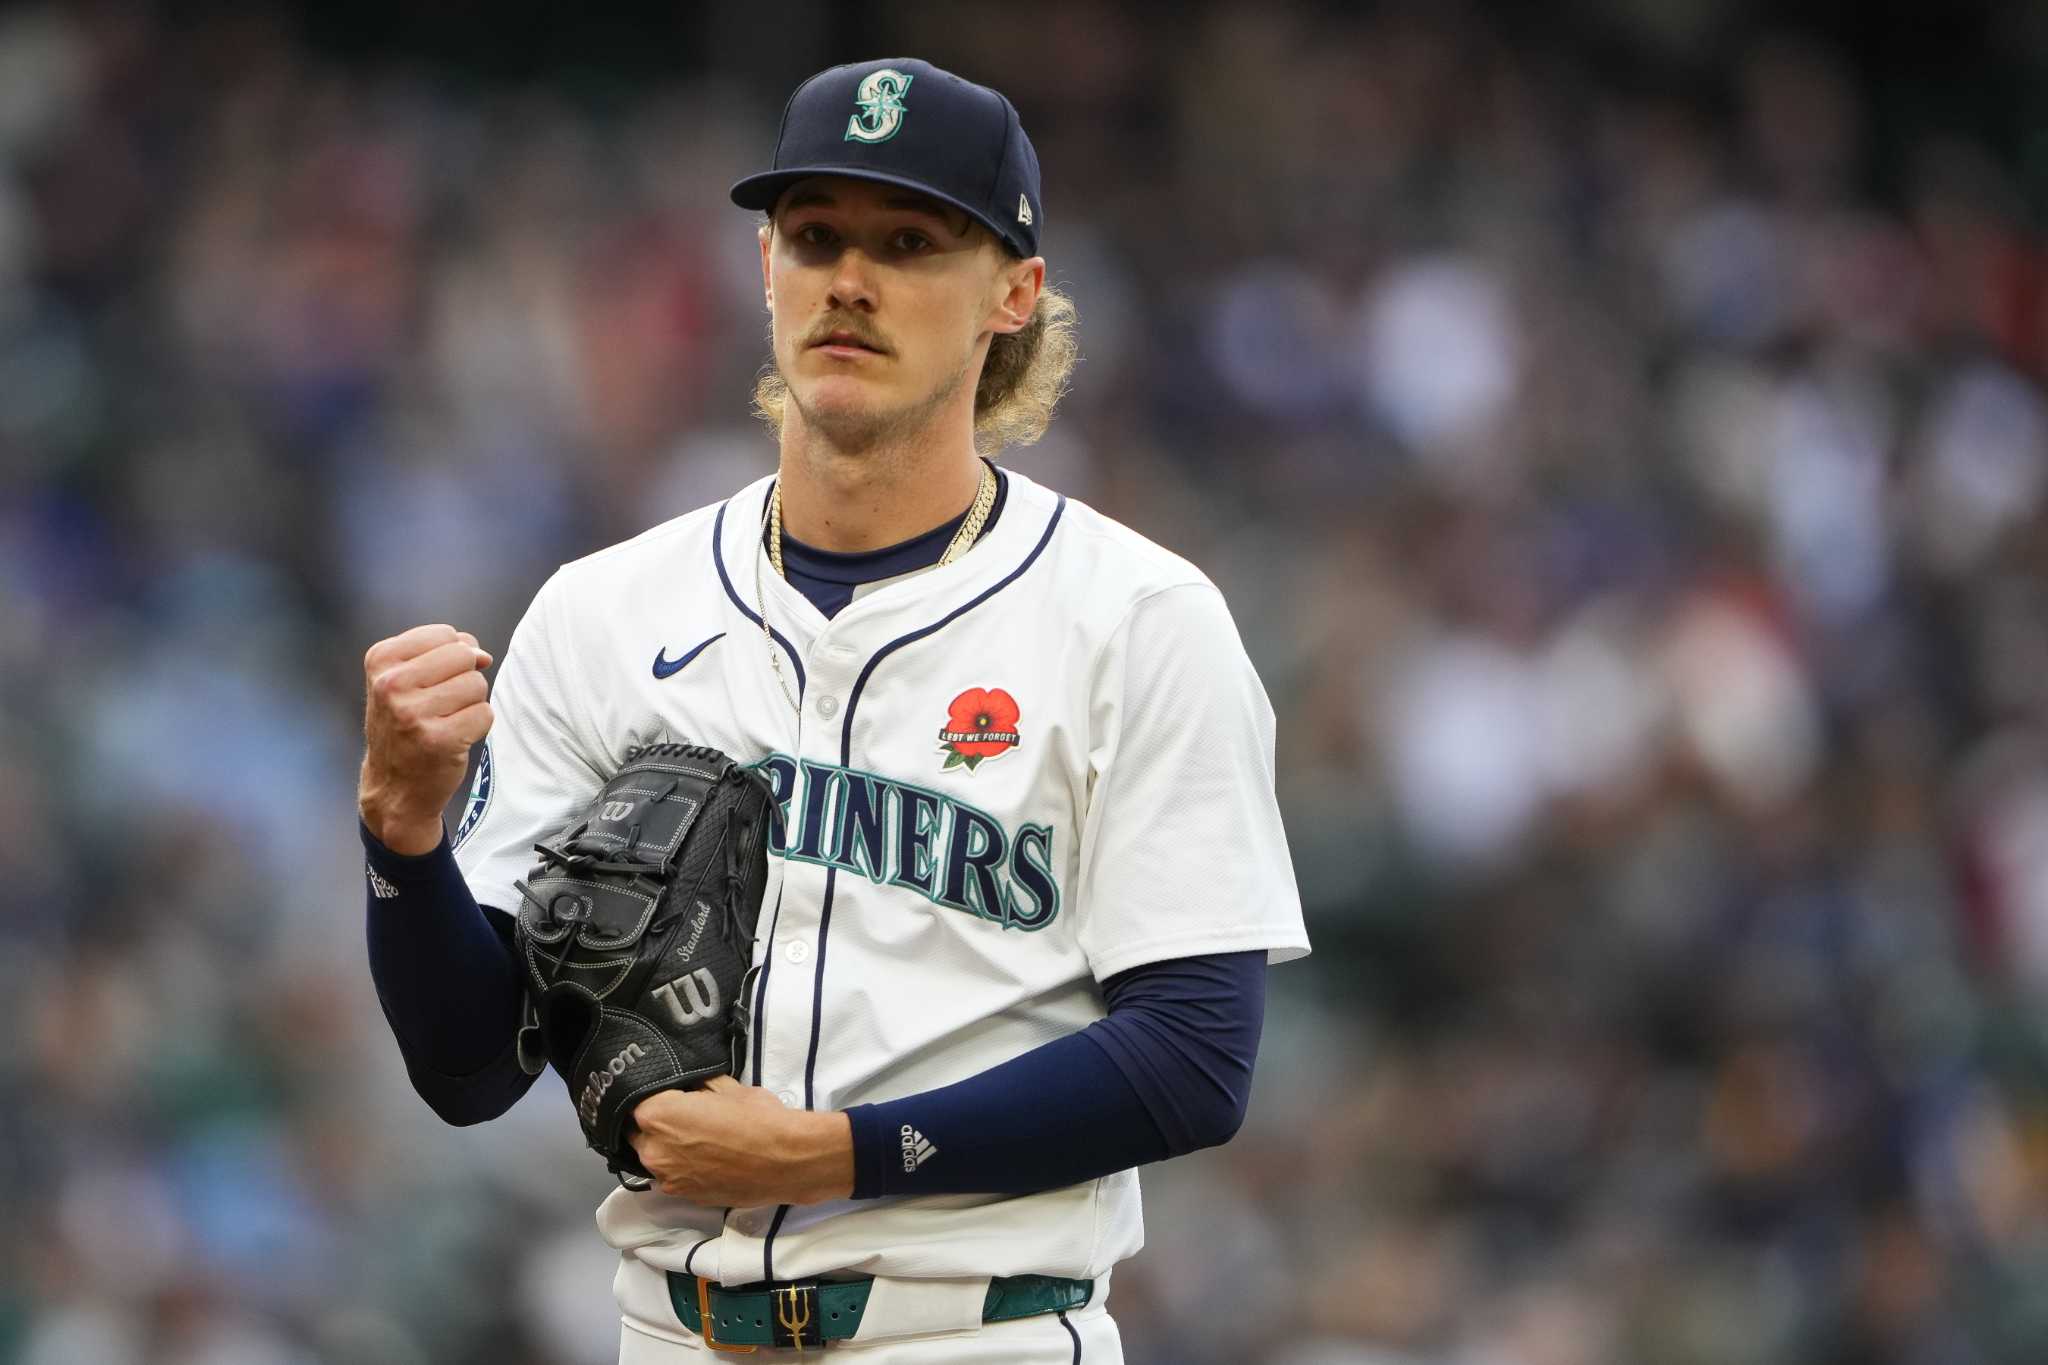 Bryce Miller picks up 1st win since April 17 as Mariners hold off Astros for 3-2 victory